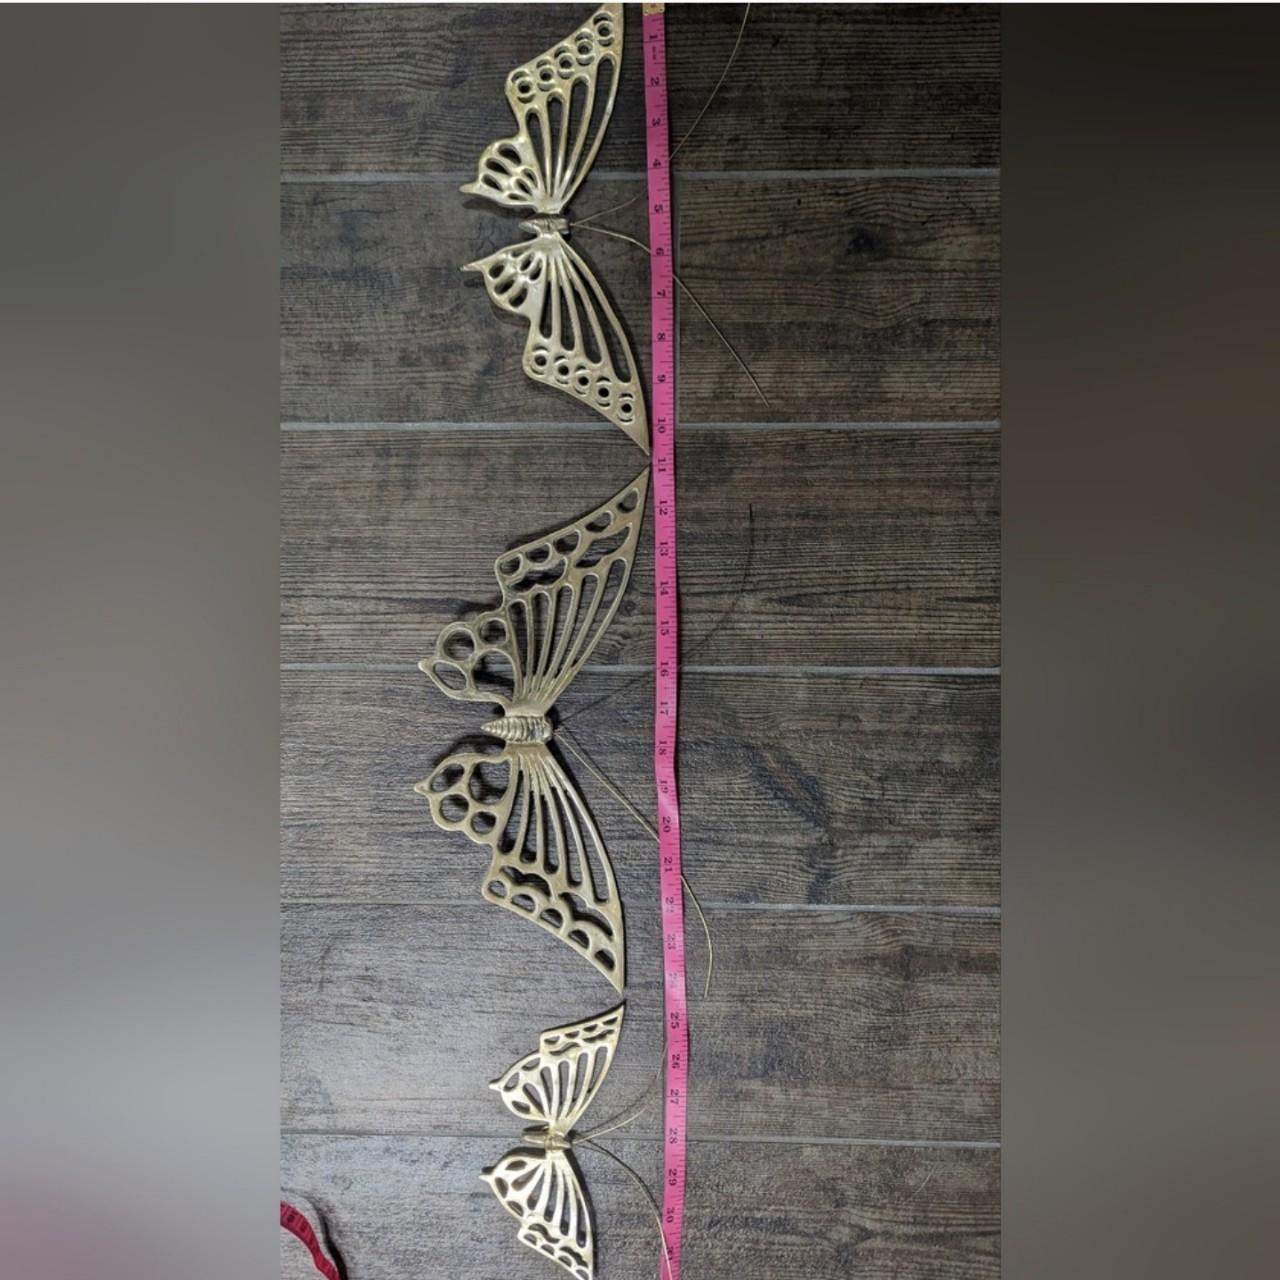 Vintage Brass Butterfly Wall Hanging Ornate Home - Depop